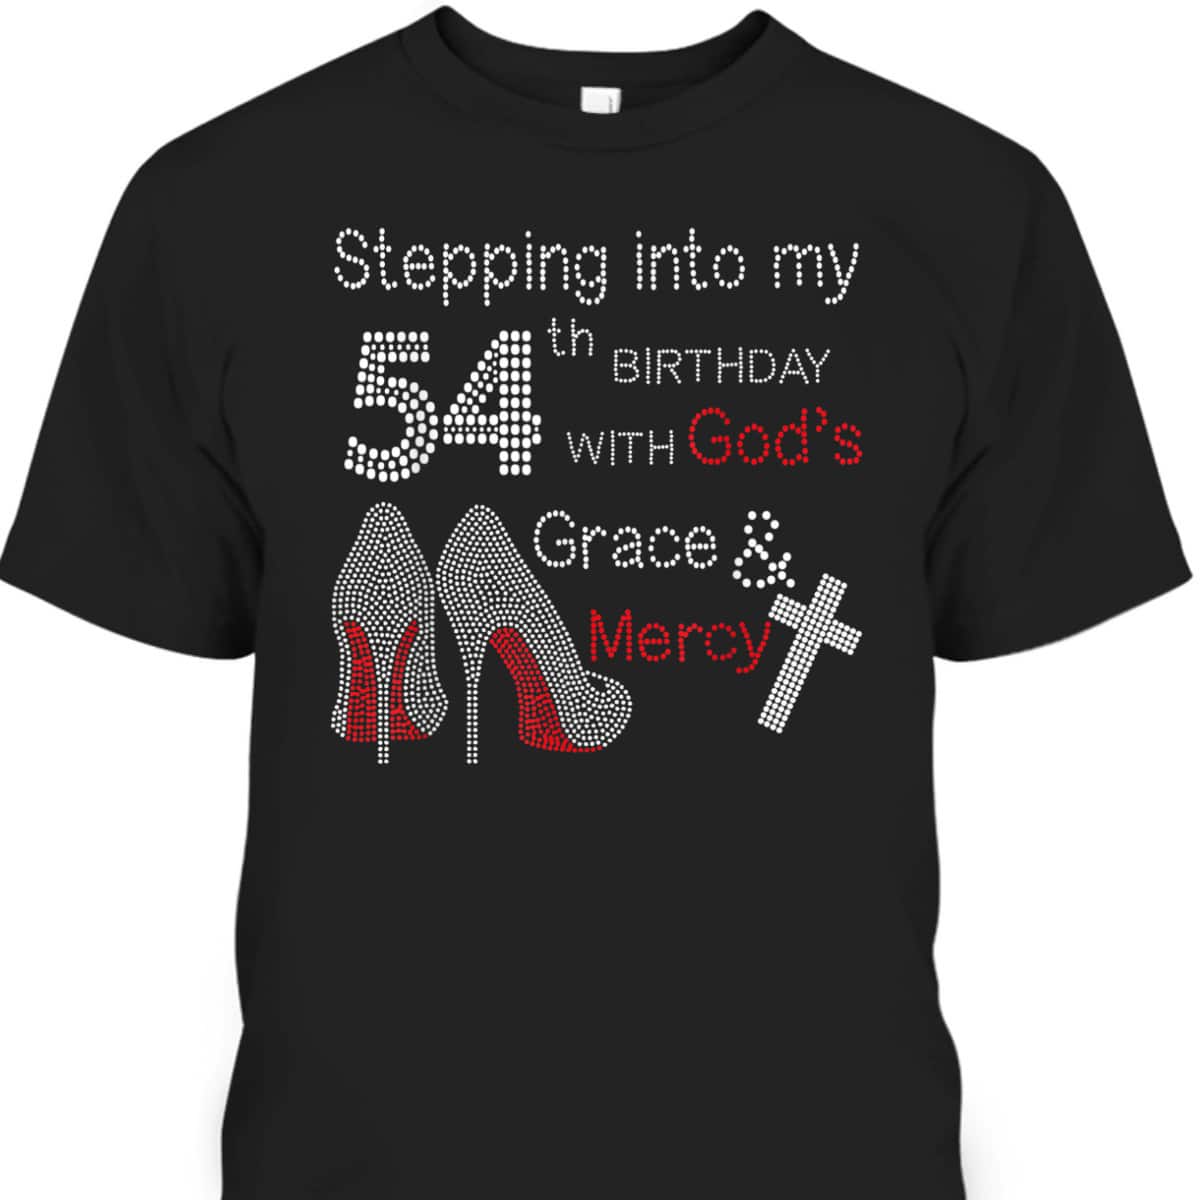 Stepping Into My 54th Birthday Christian Birthday T-Shirt With God's Grace And Mercy